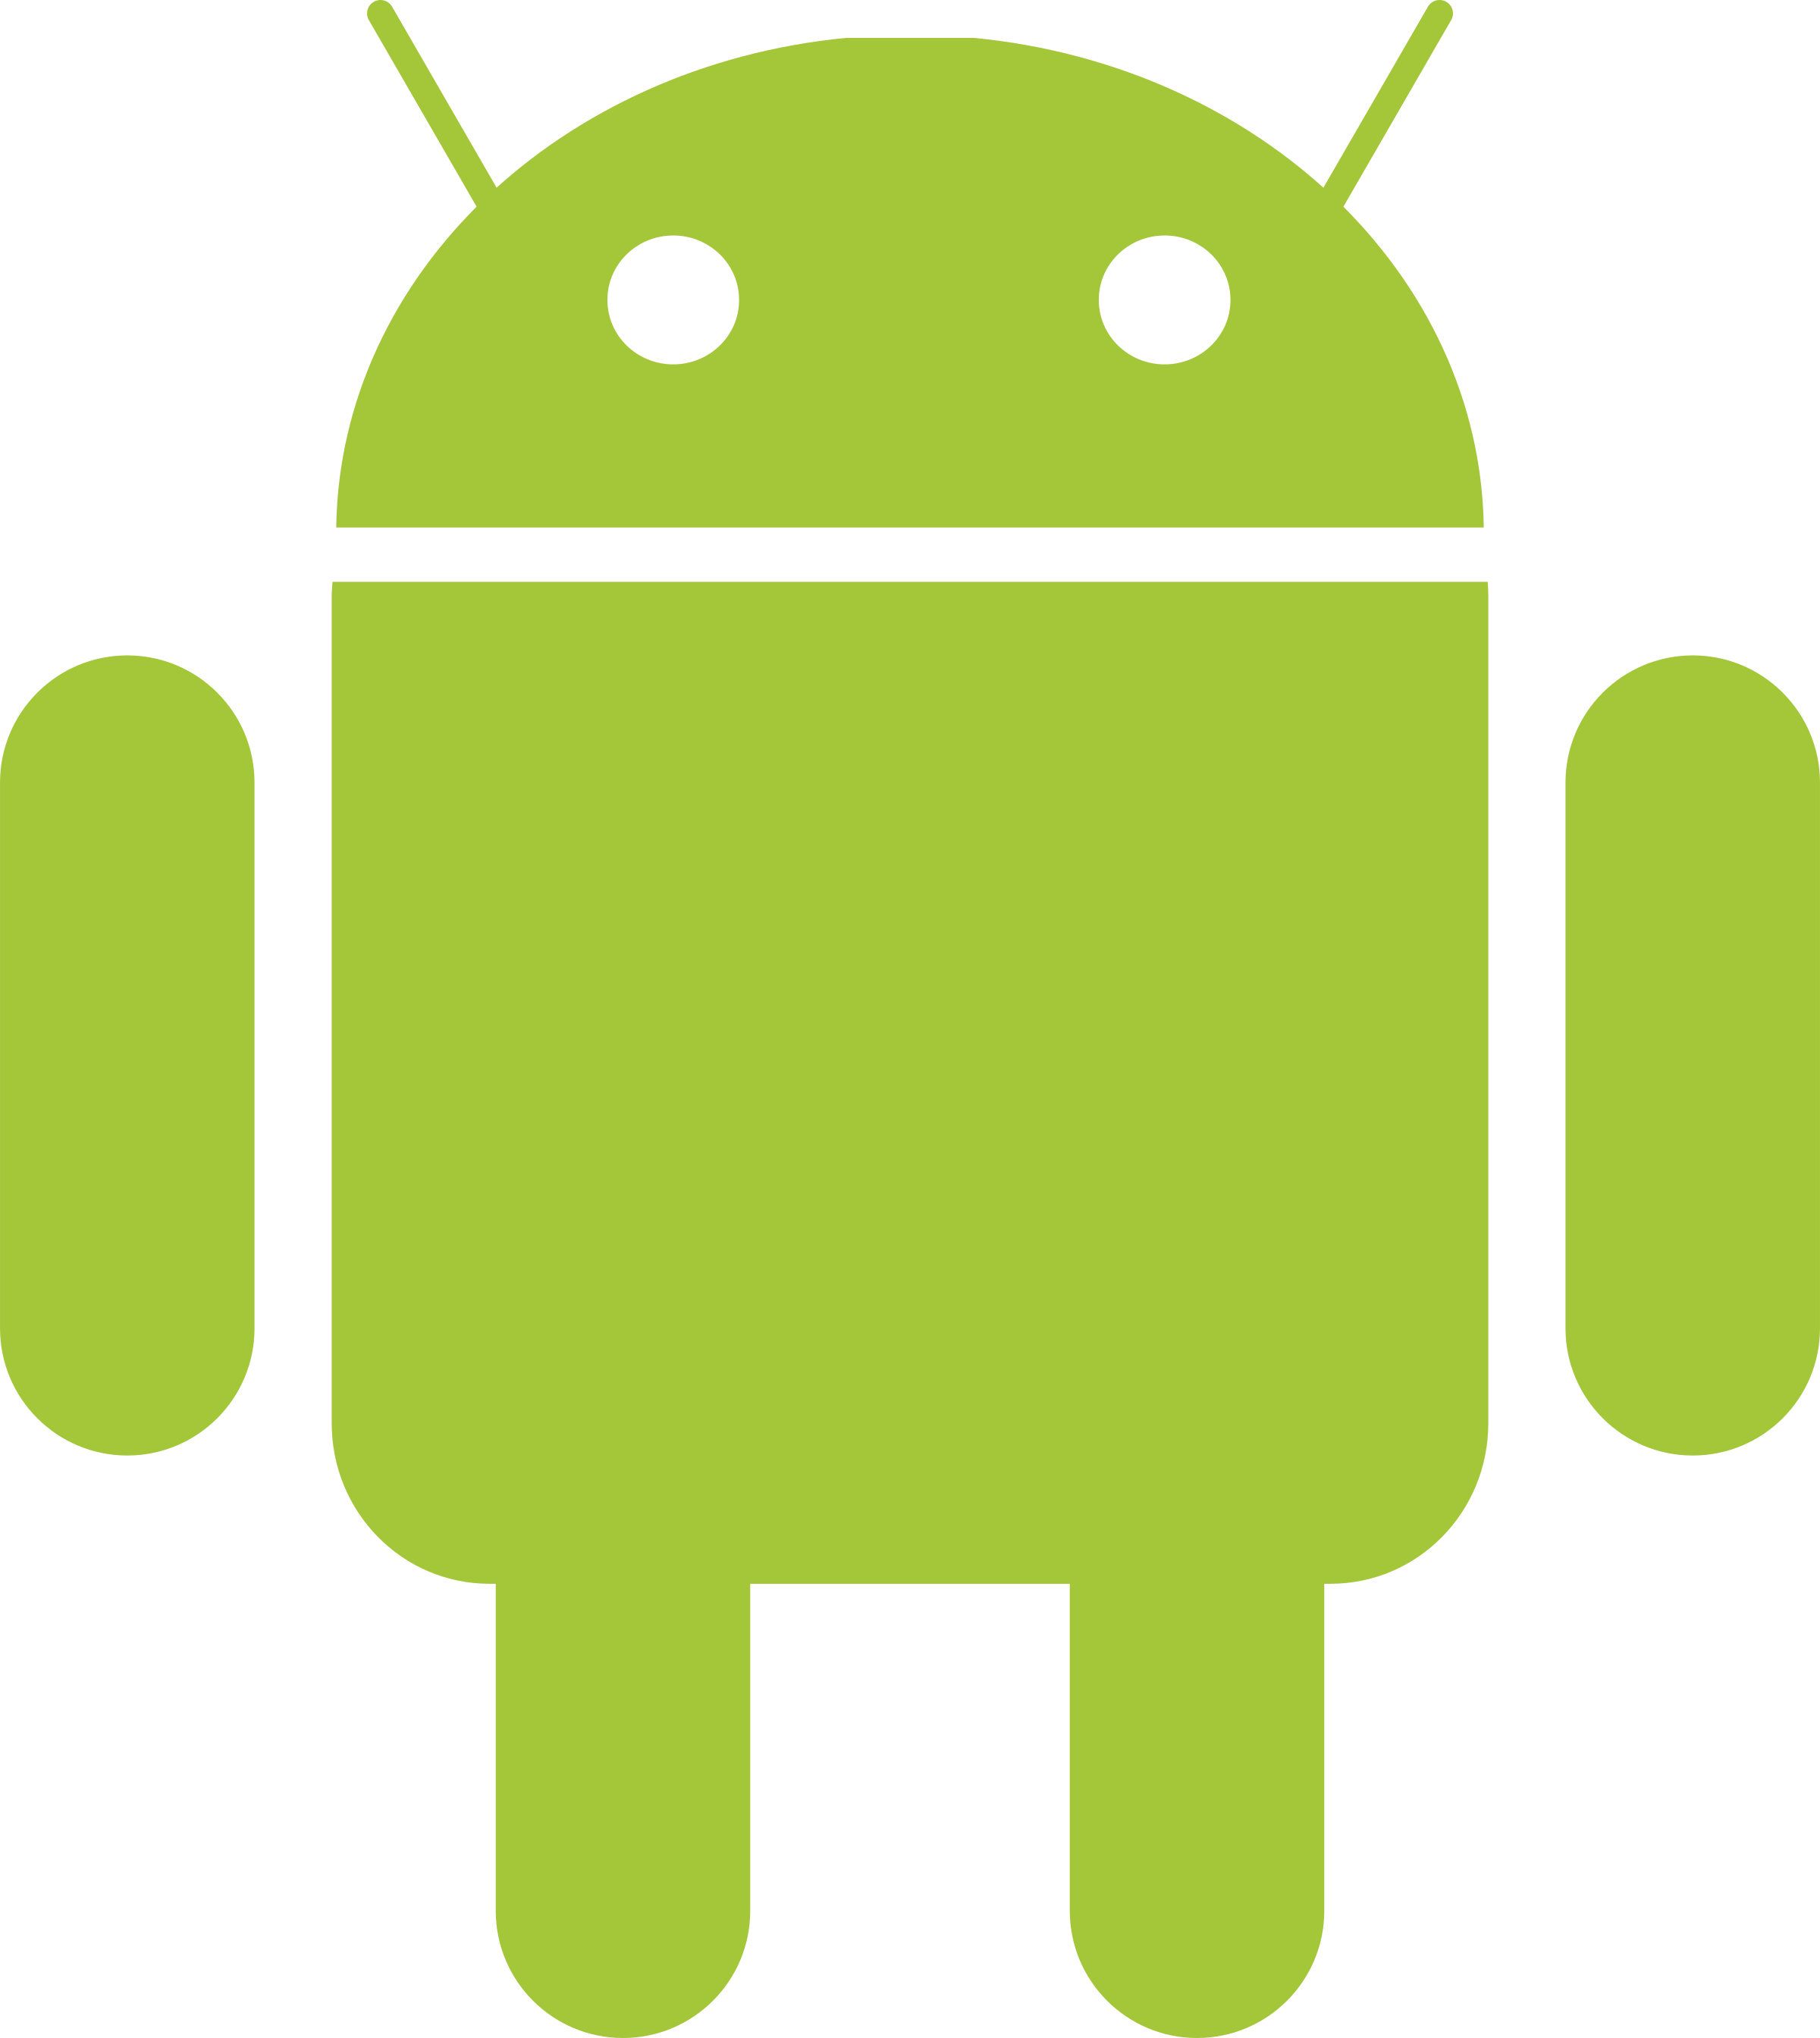 android-logo-png-transparent.png